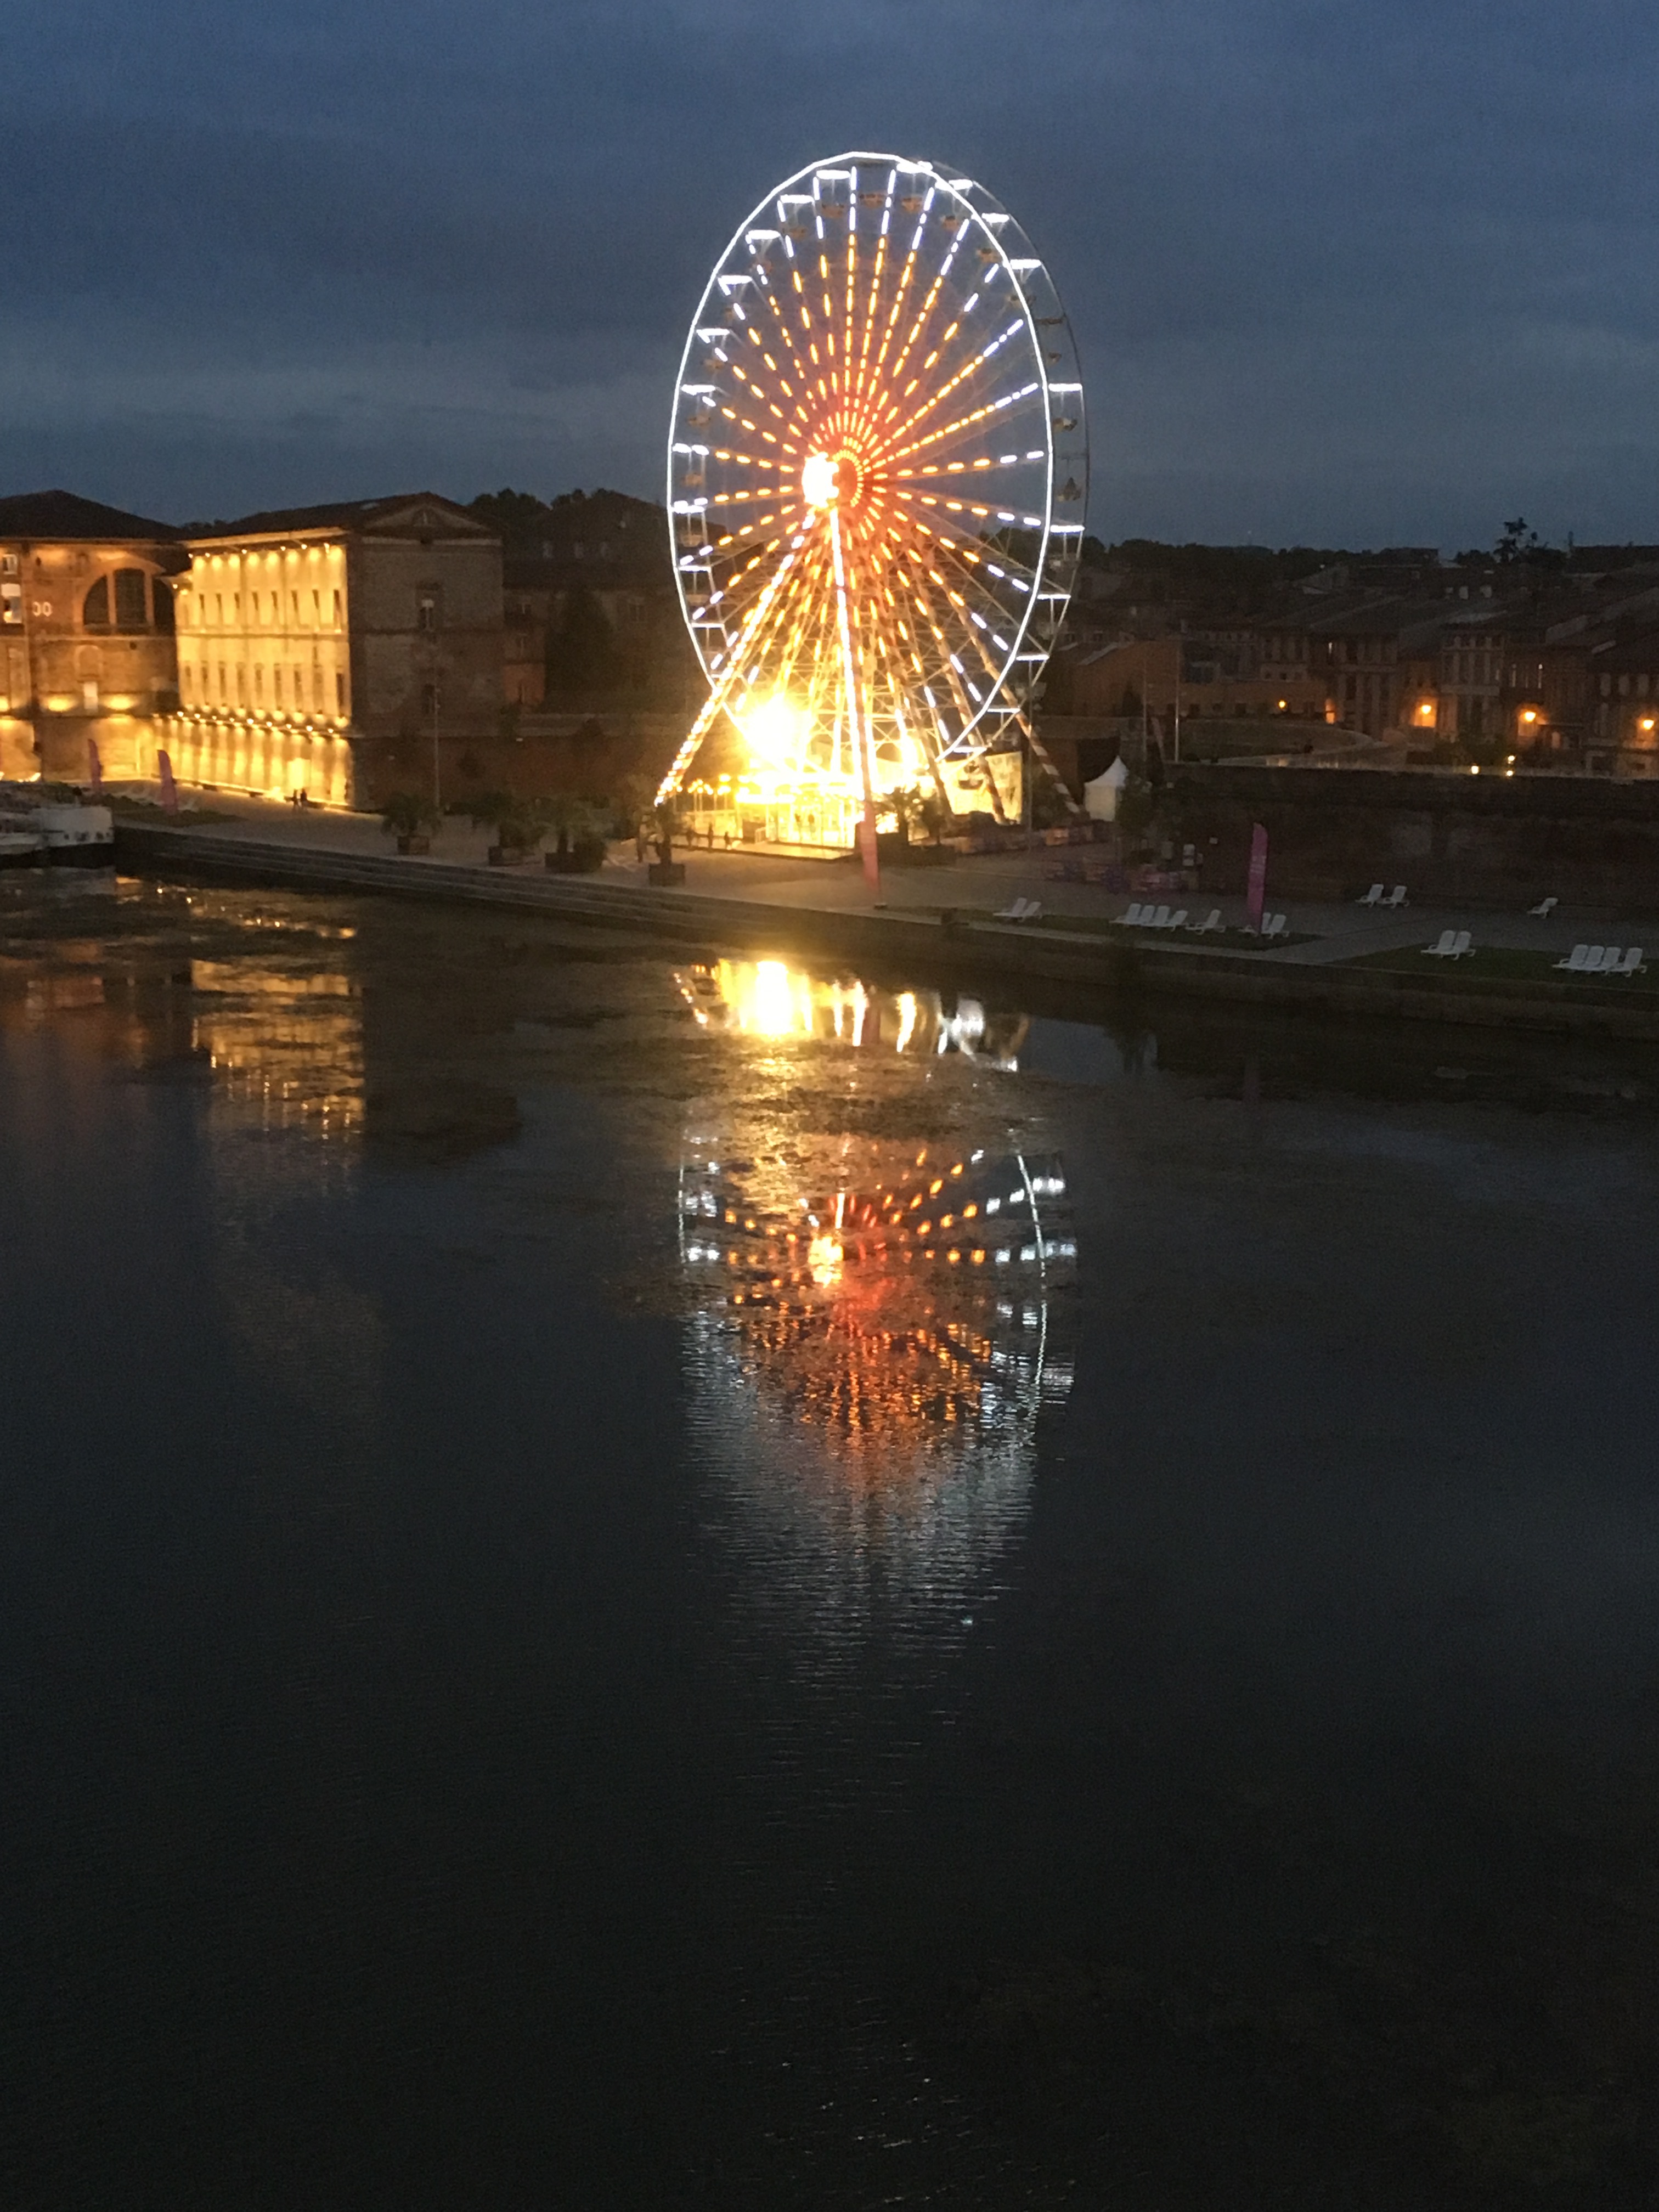 The ferris wheel in Toulouse.